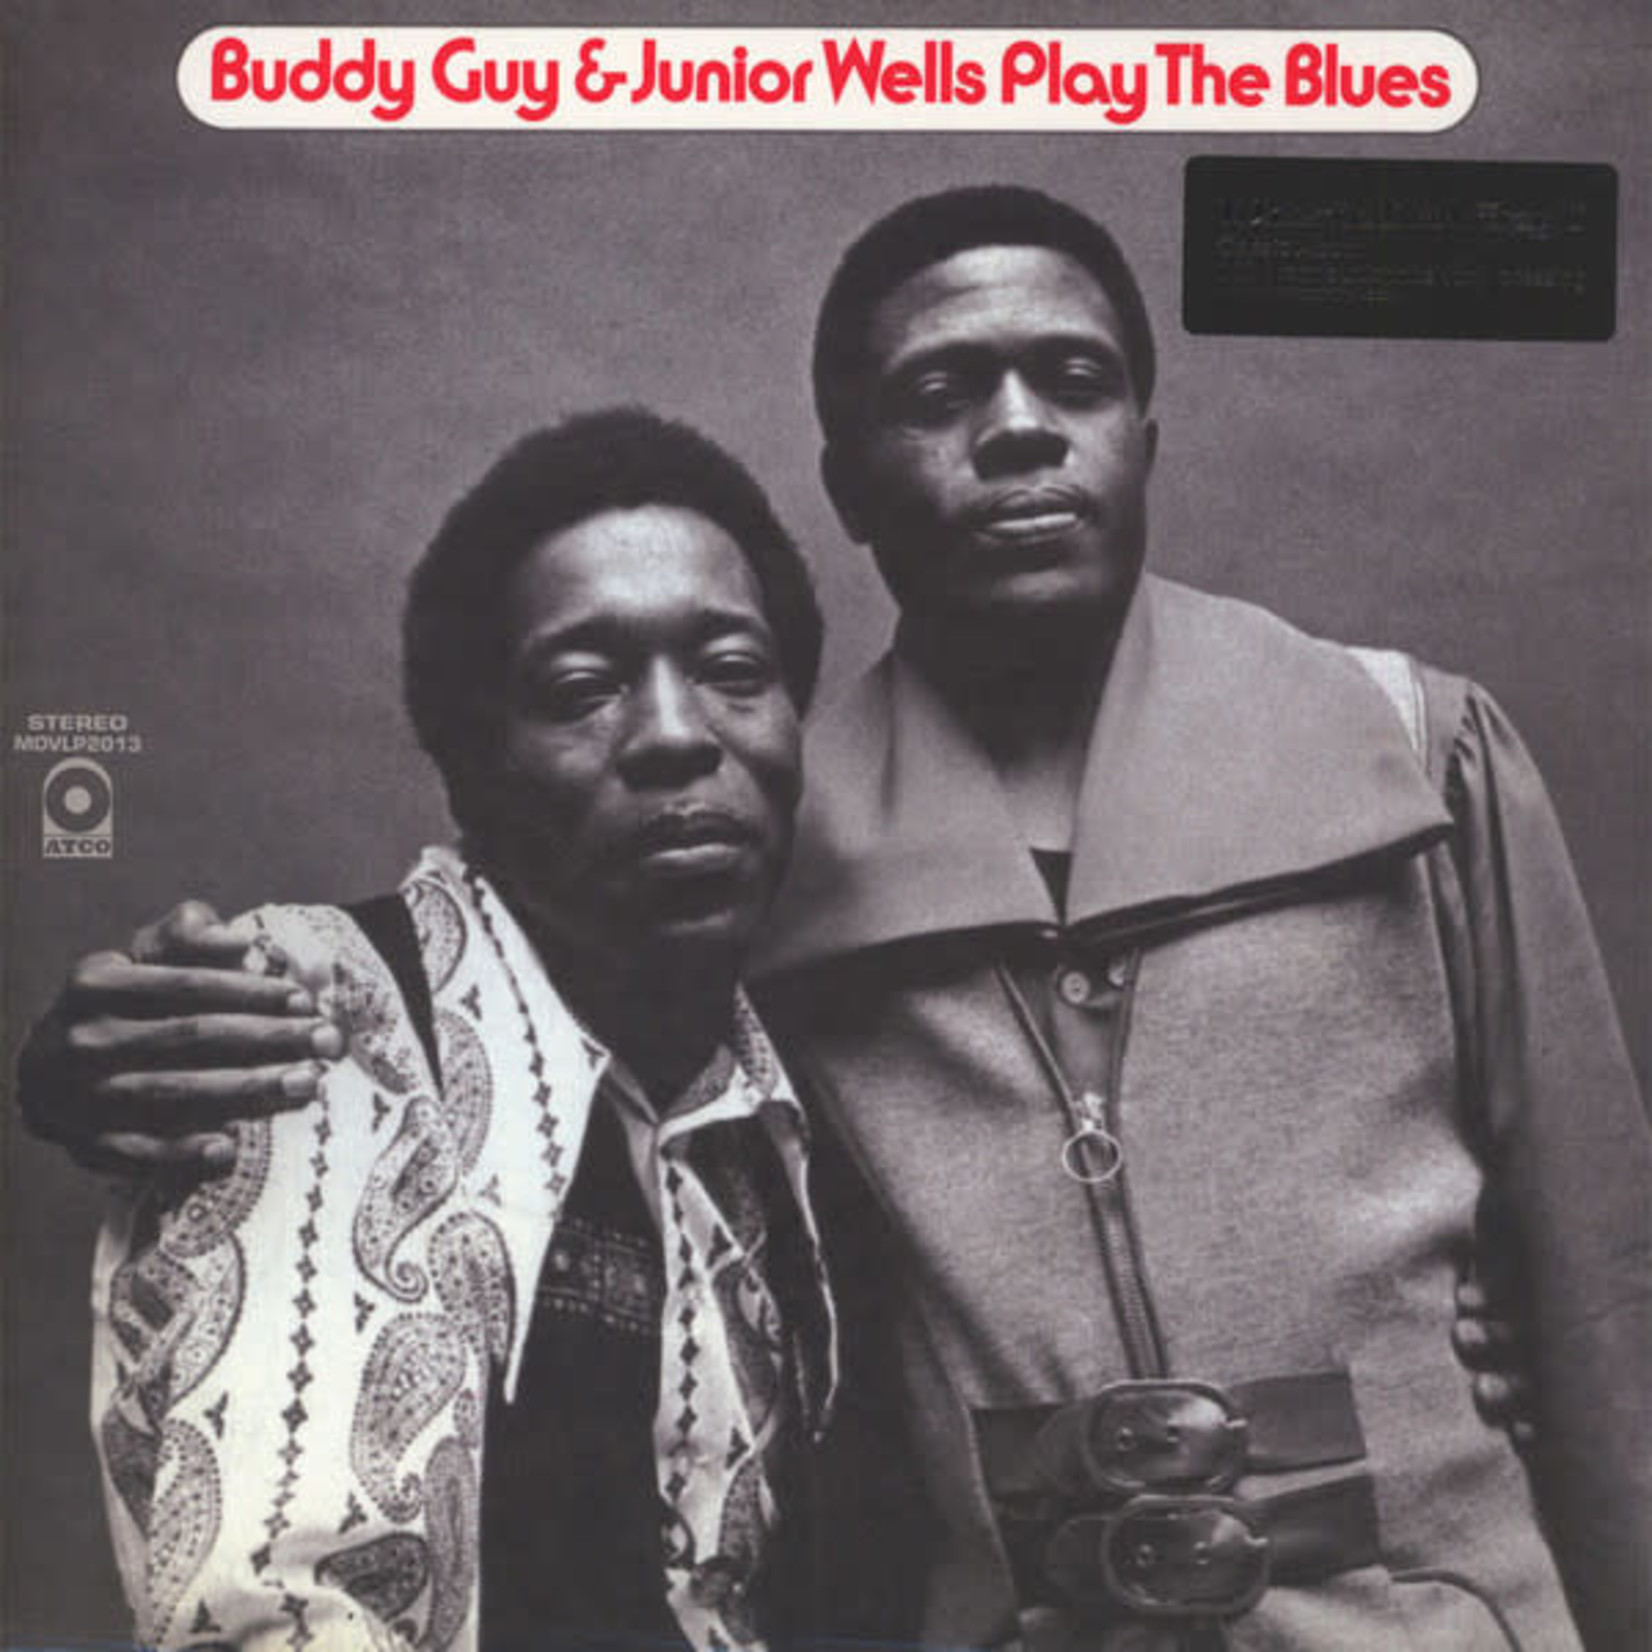 [New] Buddy Guy & Junior Wells - Play the Blues